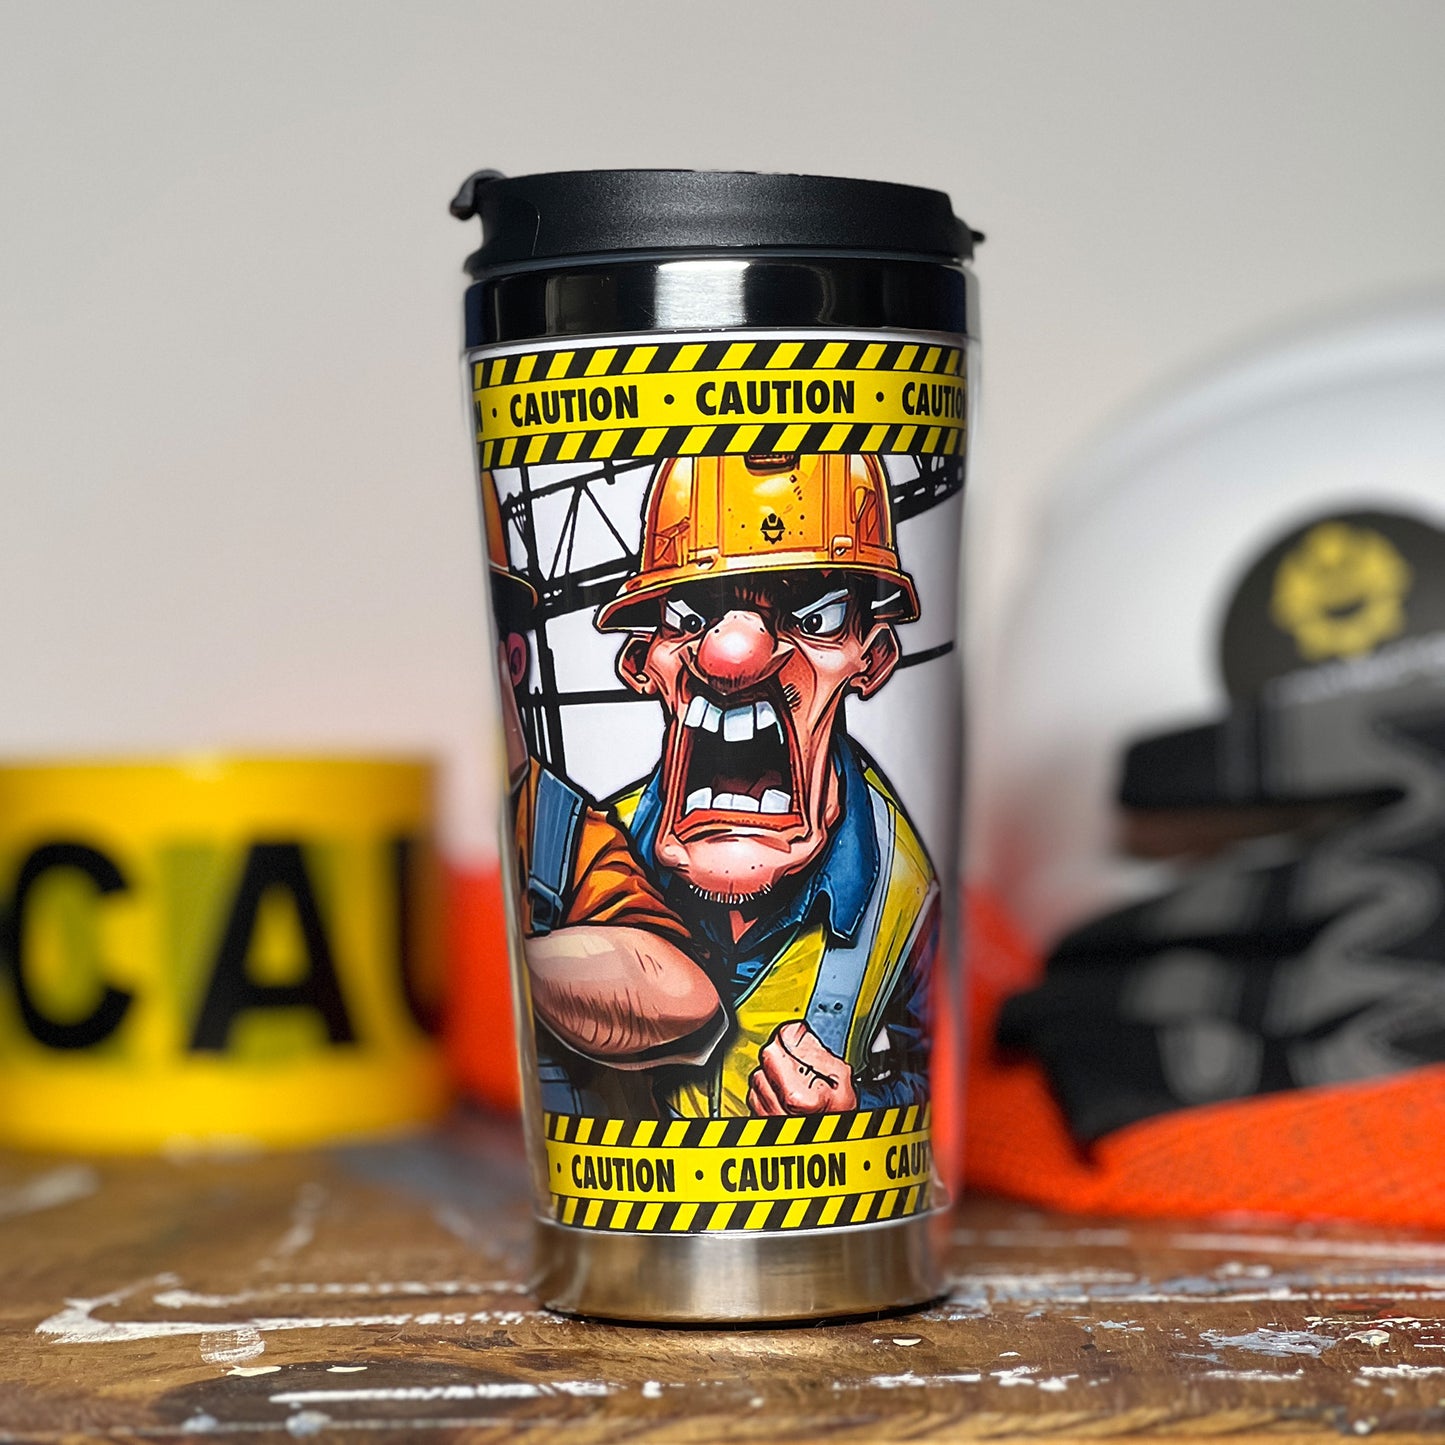 Construction Grind's "Meet the Crew" Second Shift 12 oz. coffee tumbler. Showing a close-up of our Safety Manager, "Danny", one of three crew members shown on the tumbler.